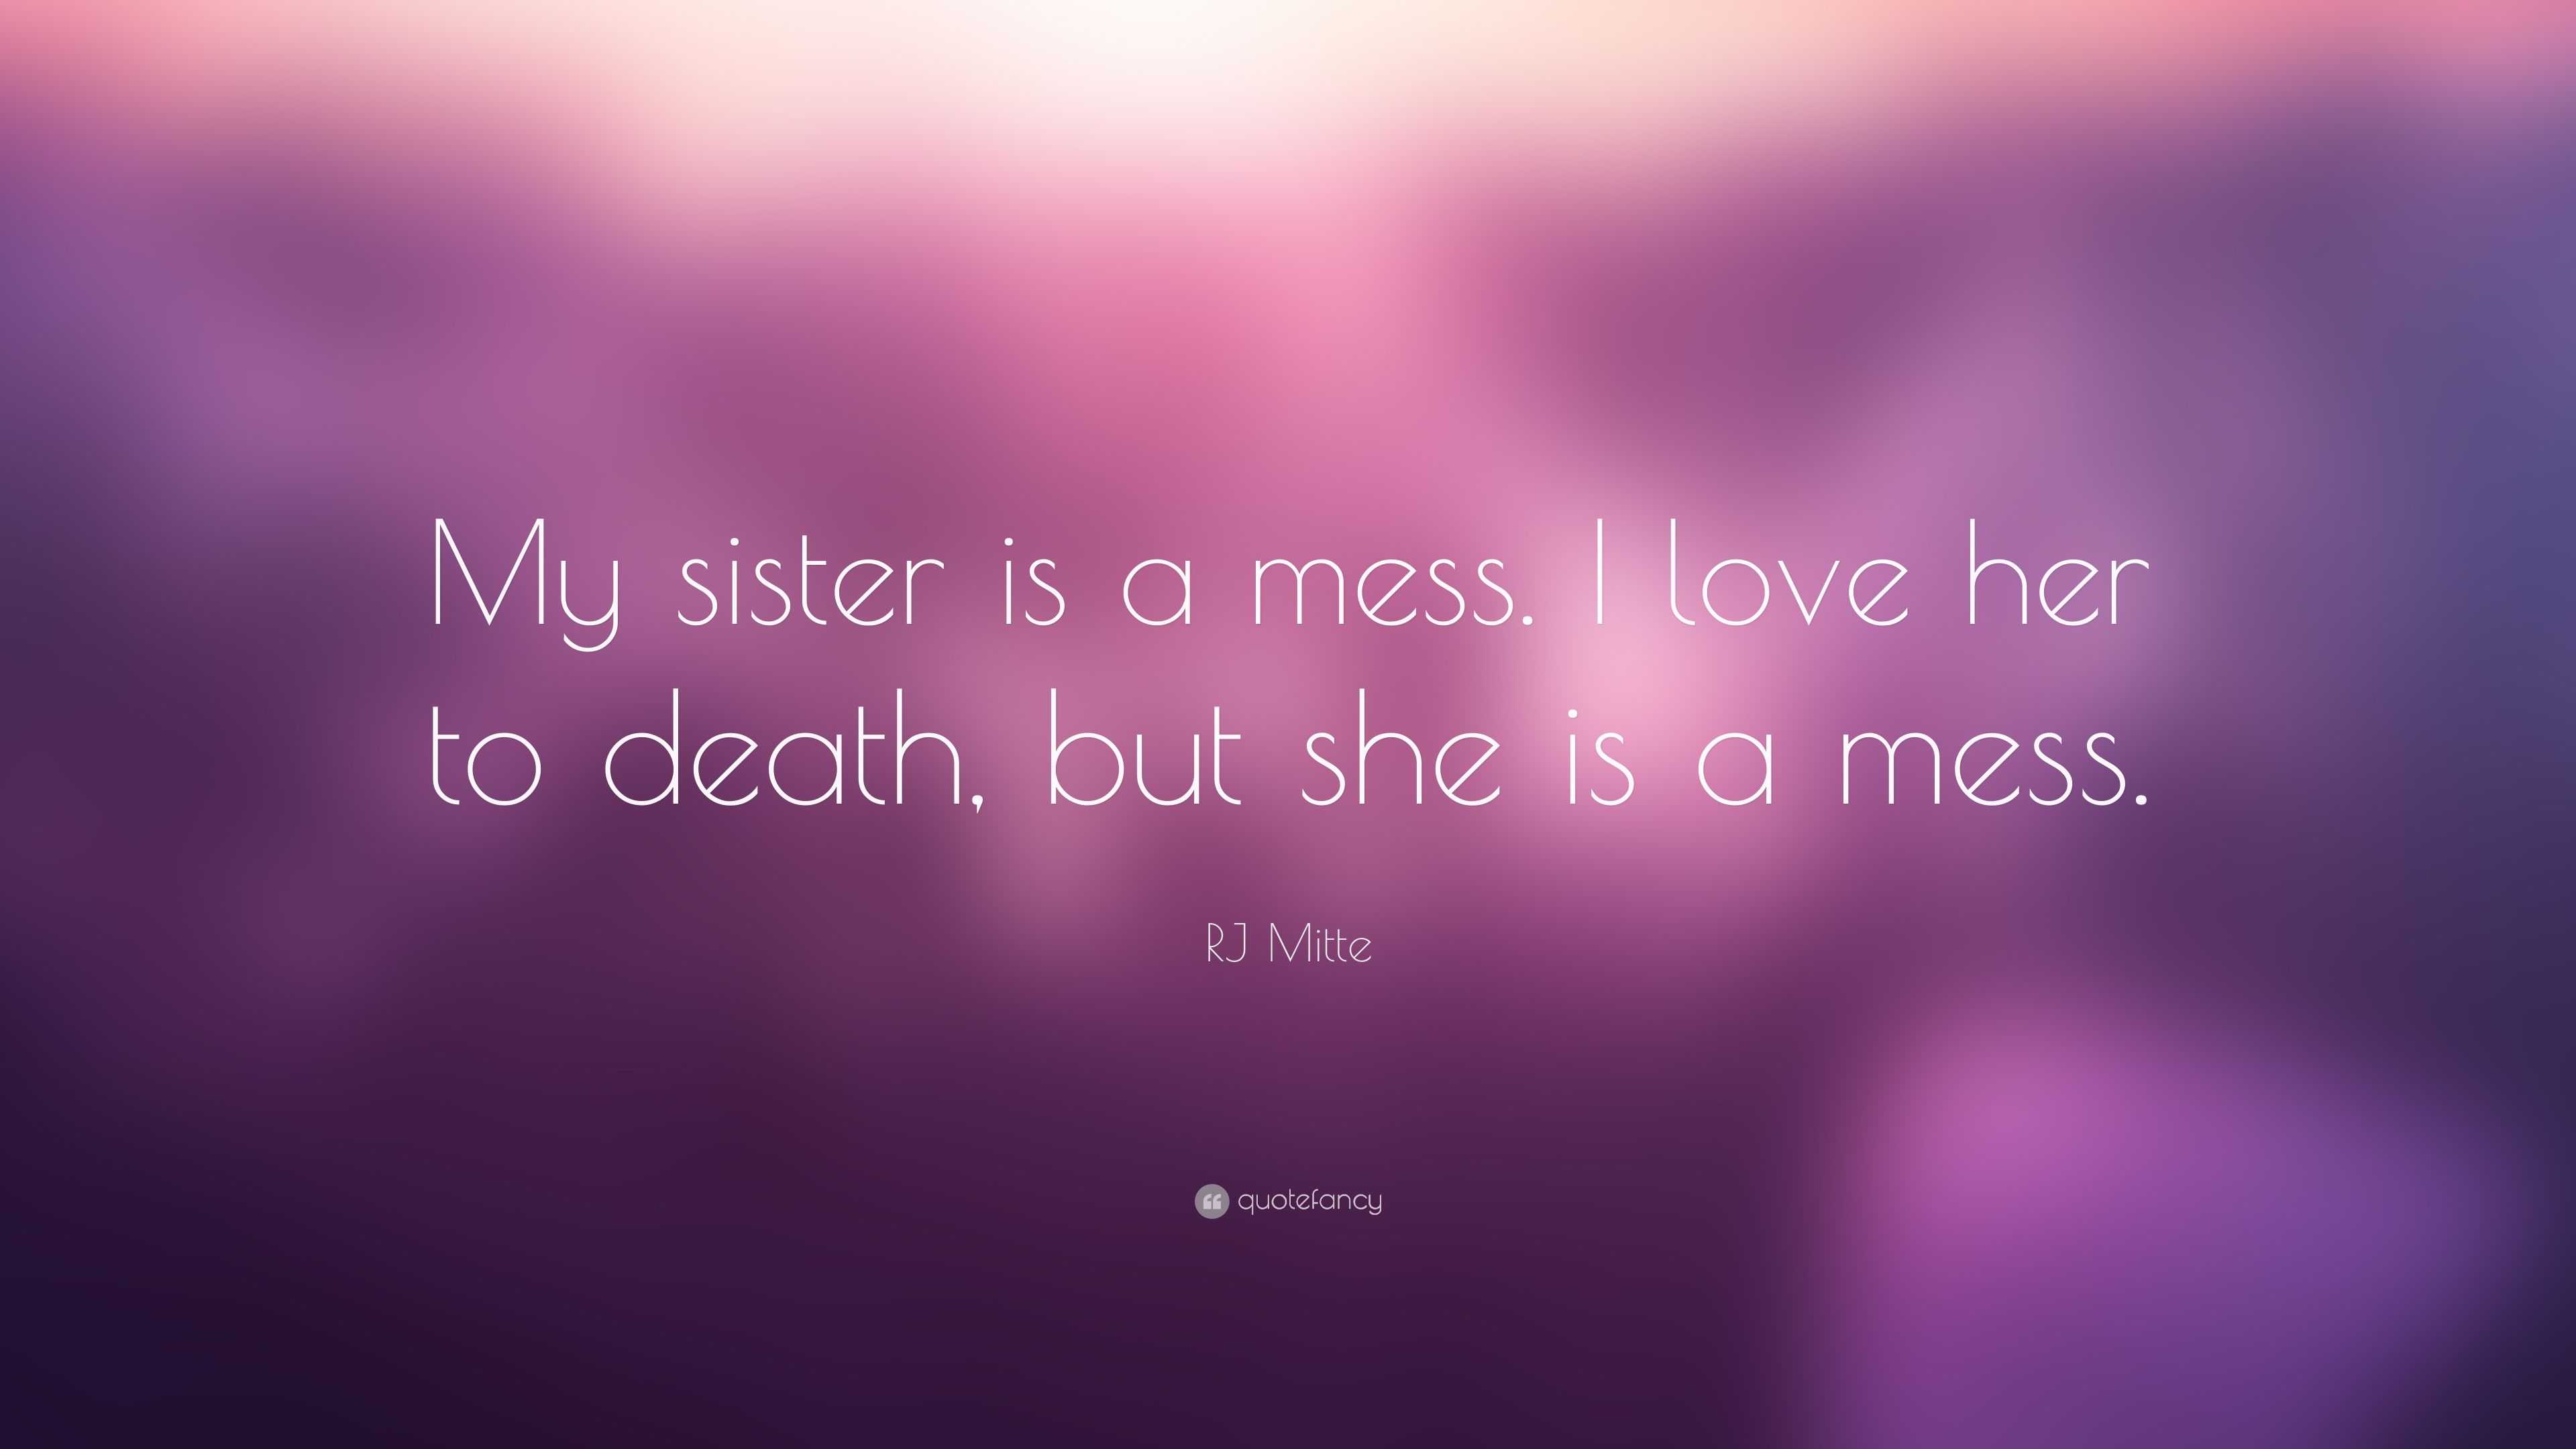 RJ Mitte Quote: “My sister is a mess. I love her to death, but she is